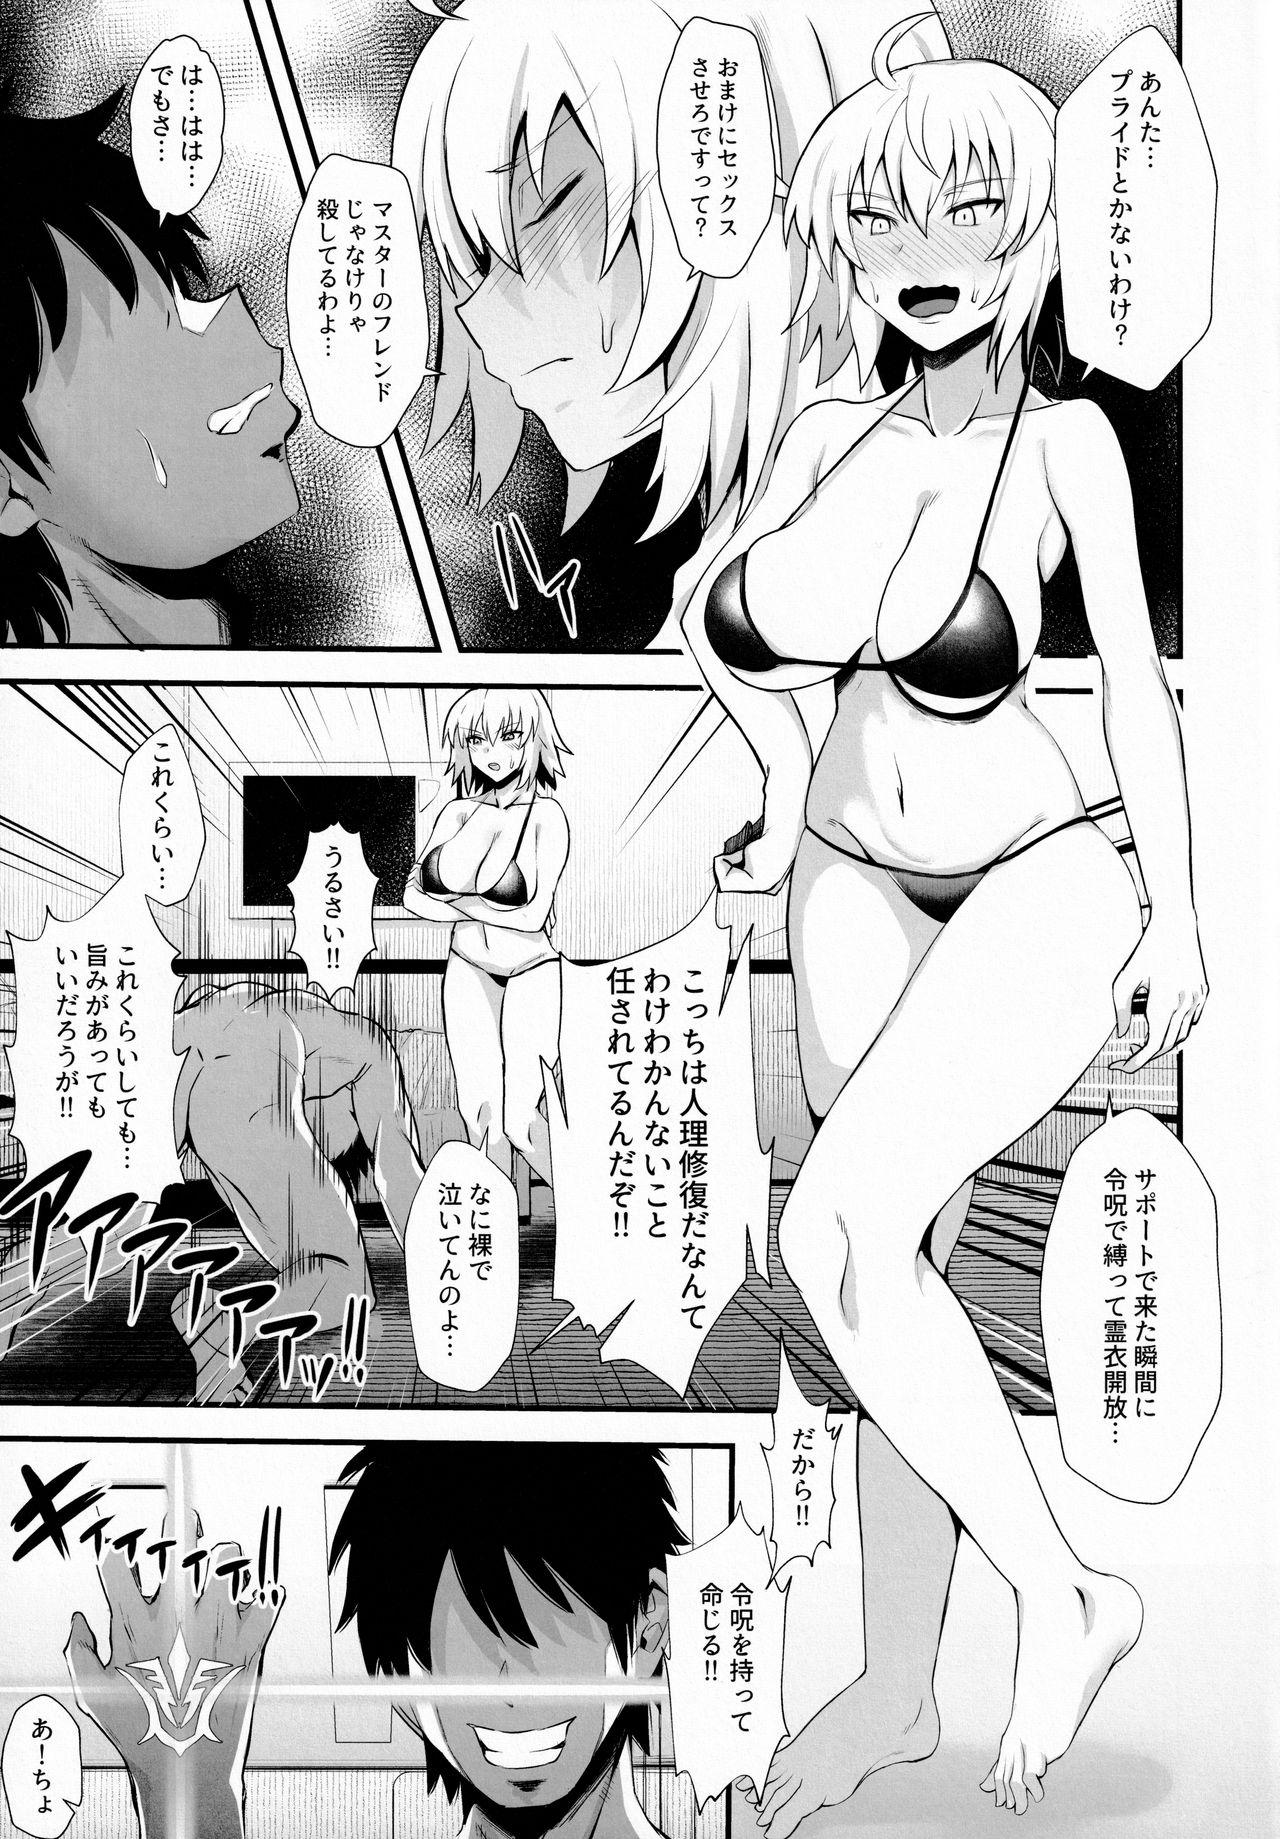 Men Support Order - Fate grand order Gayhardcore - Page 3